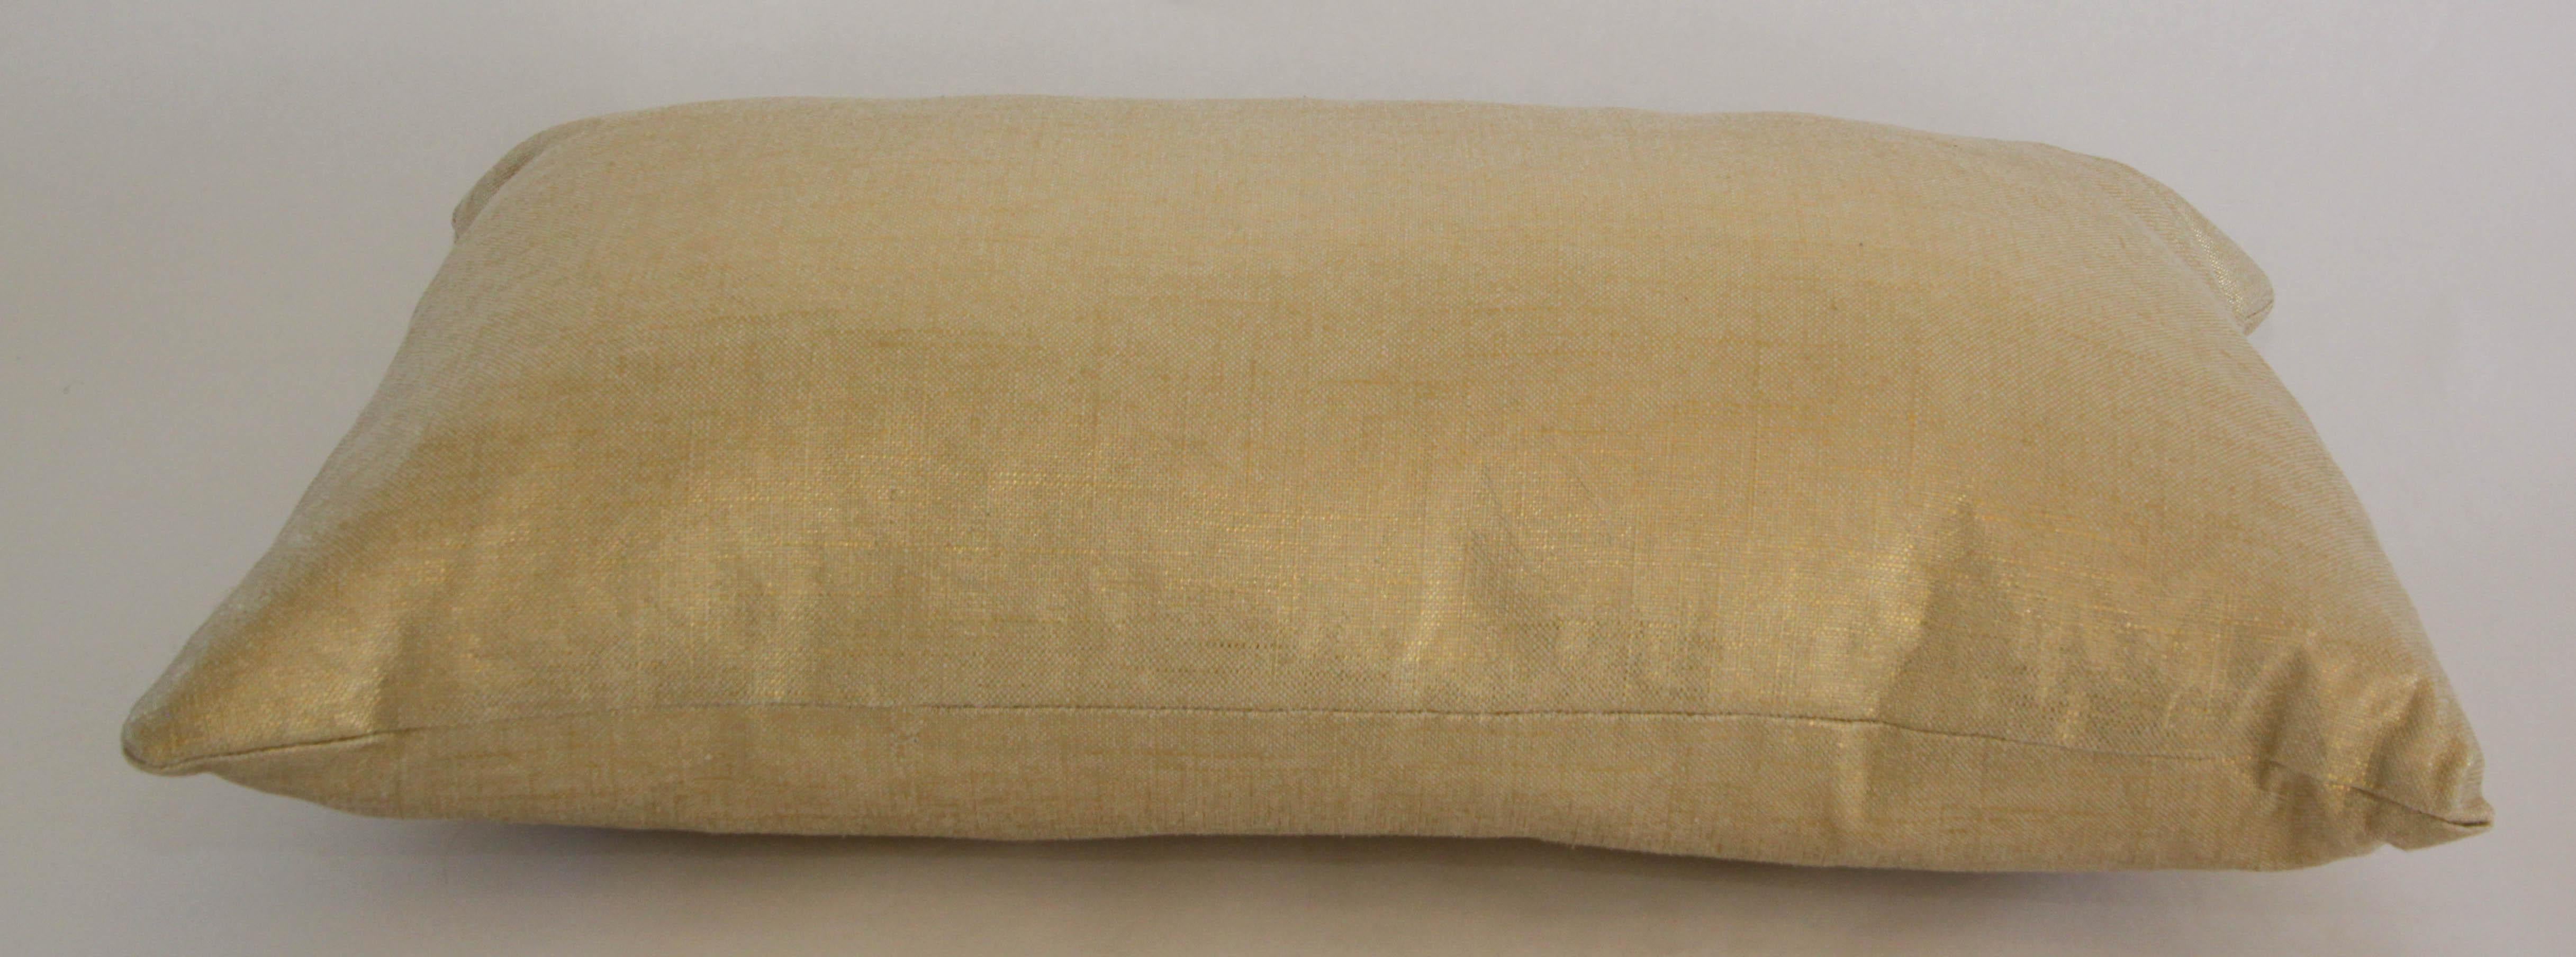 Modern Vintage Lumbar Throw Pillow in Champagne Gold Shimmer For Sale